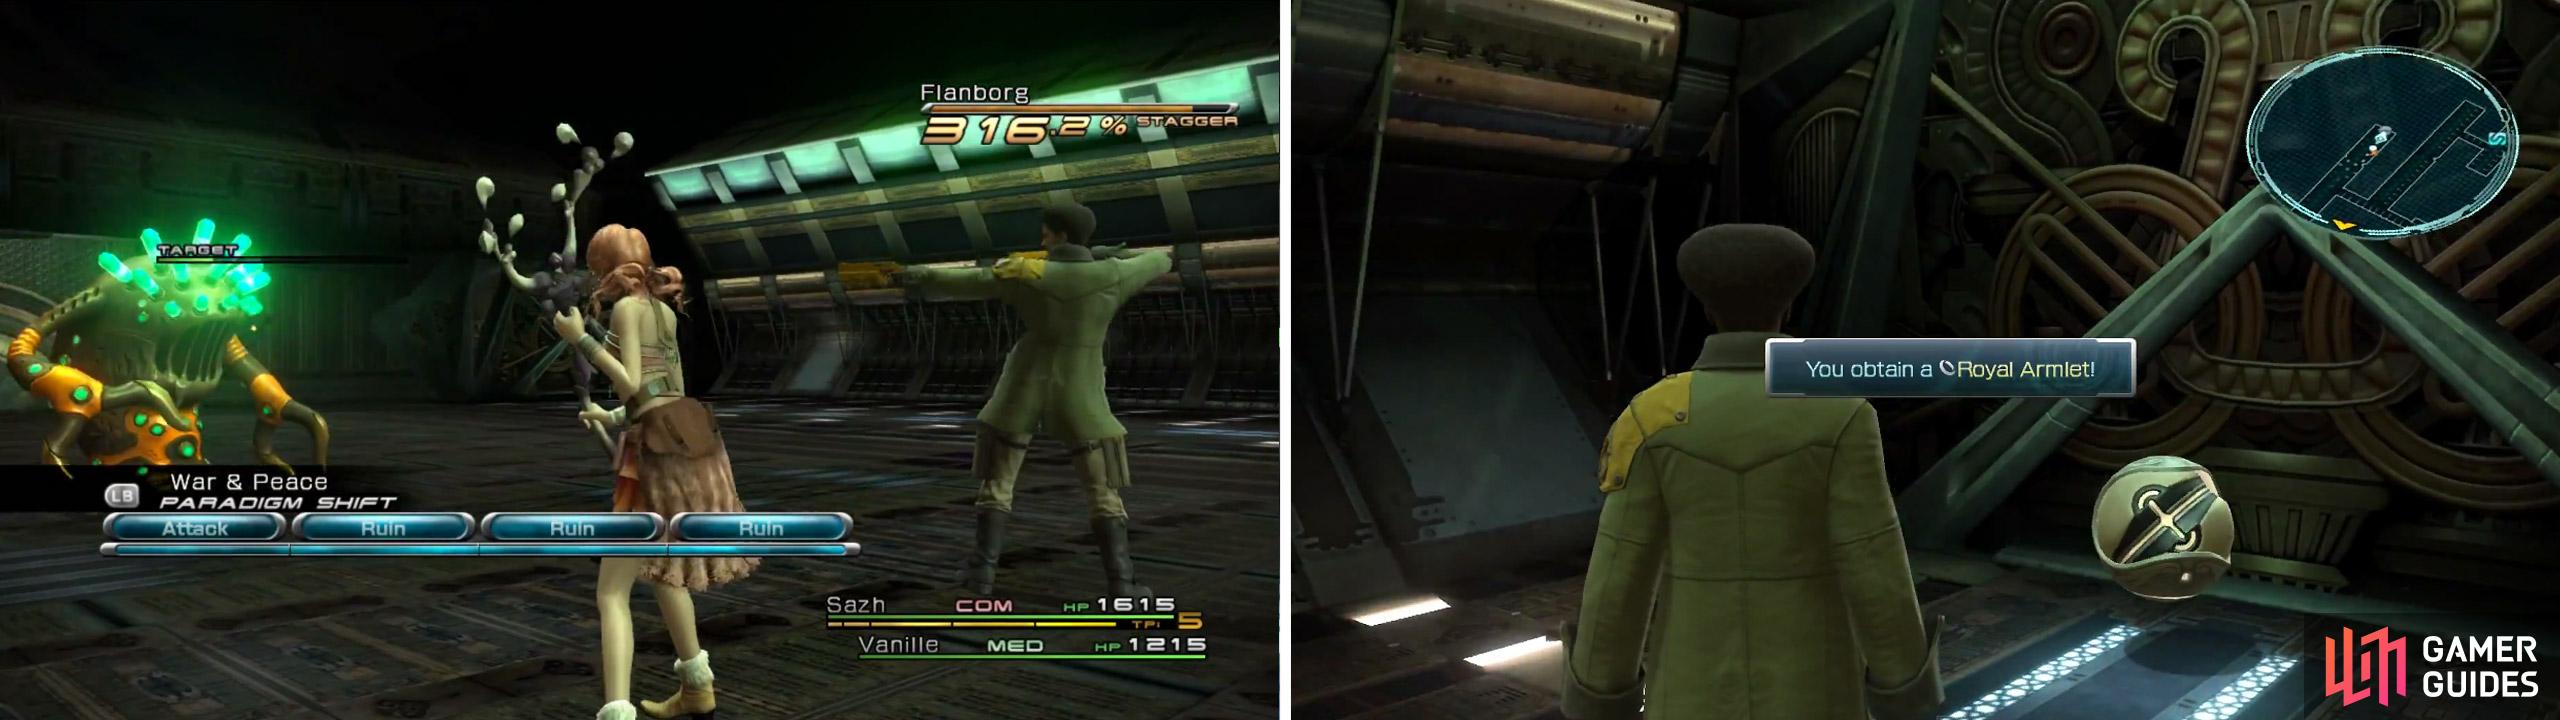 Flanborg enemy (left) and Royal Armlet location (right).